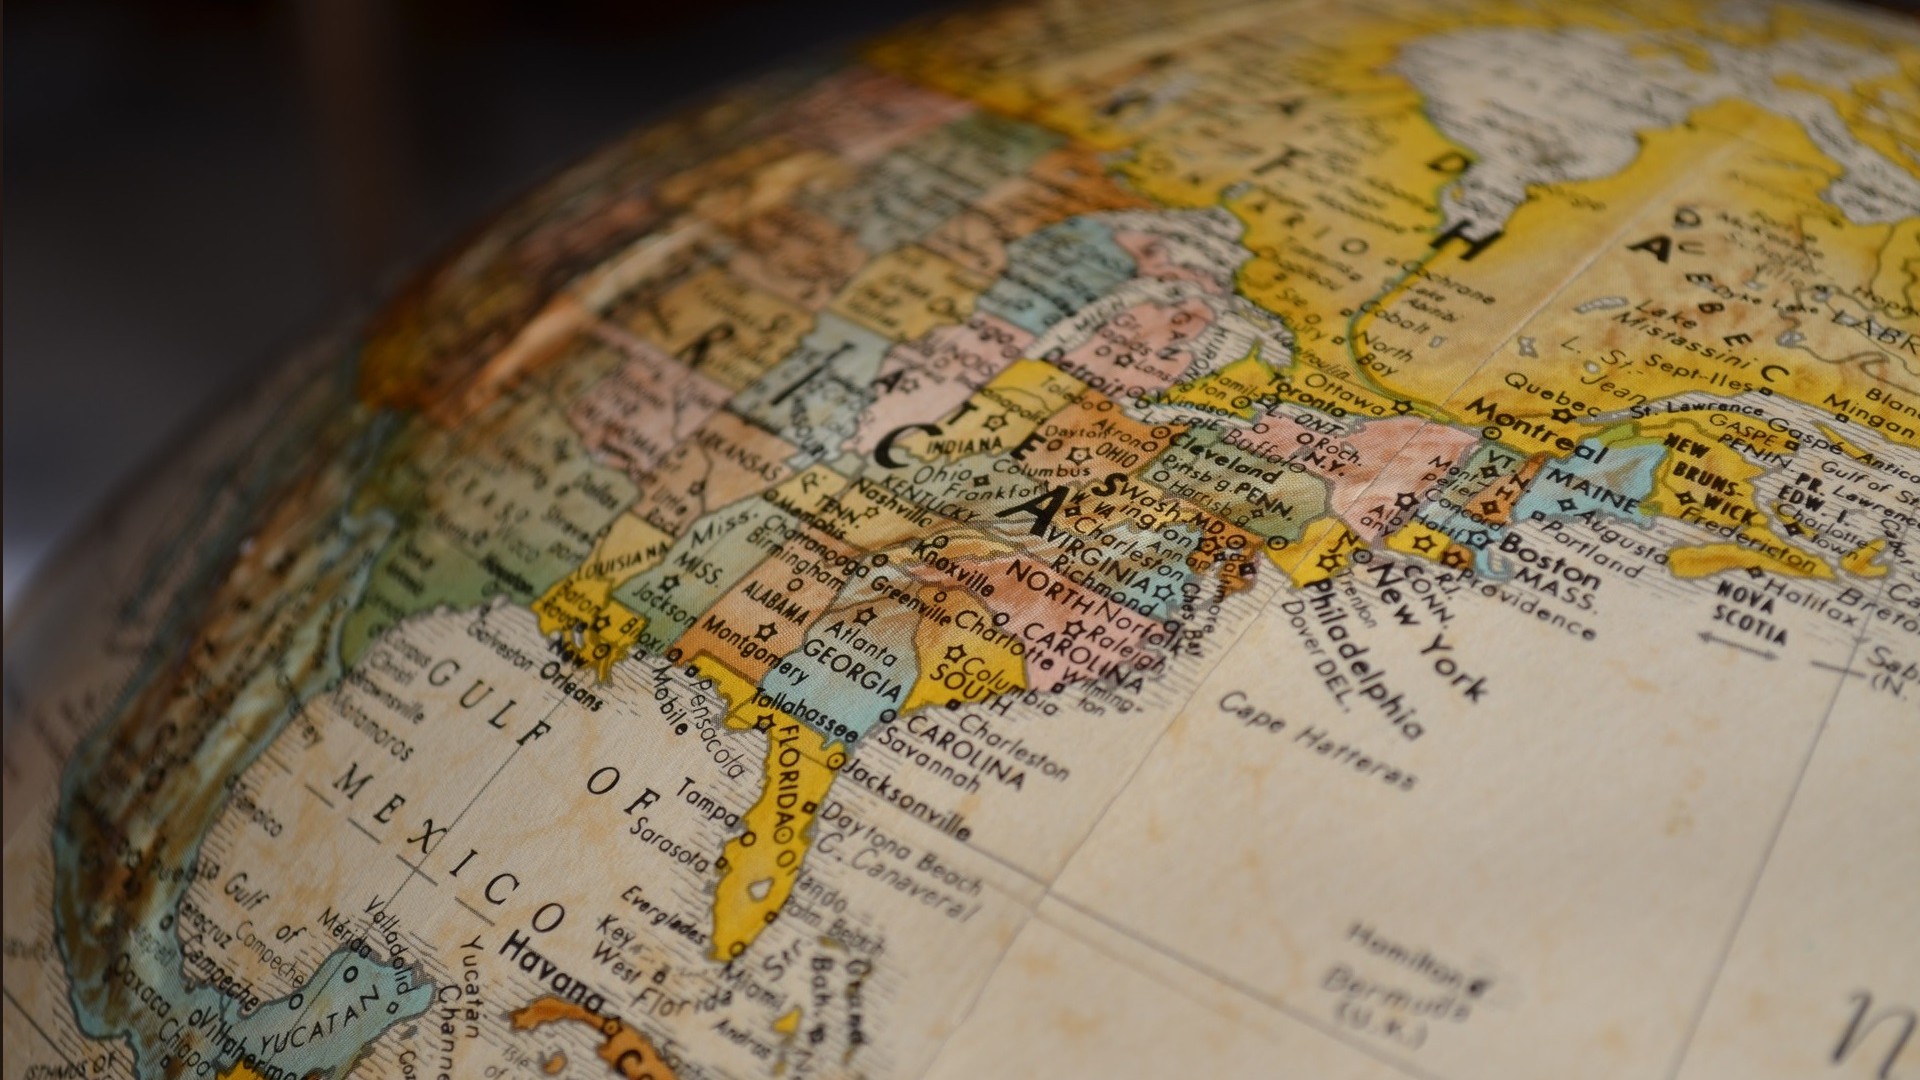 A globe of the world that is focusing on eastern america, highlighting states such as Georgia, Virginia and Carolina.